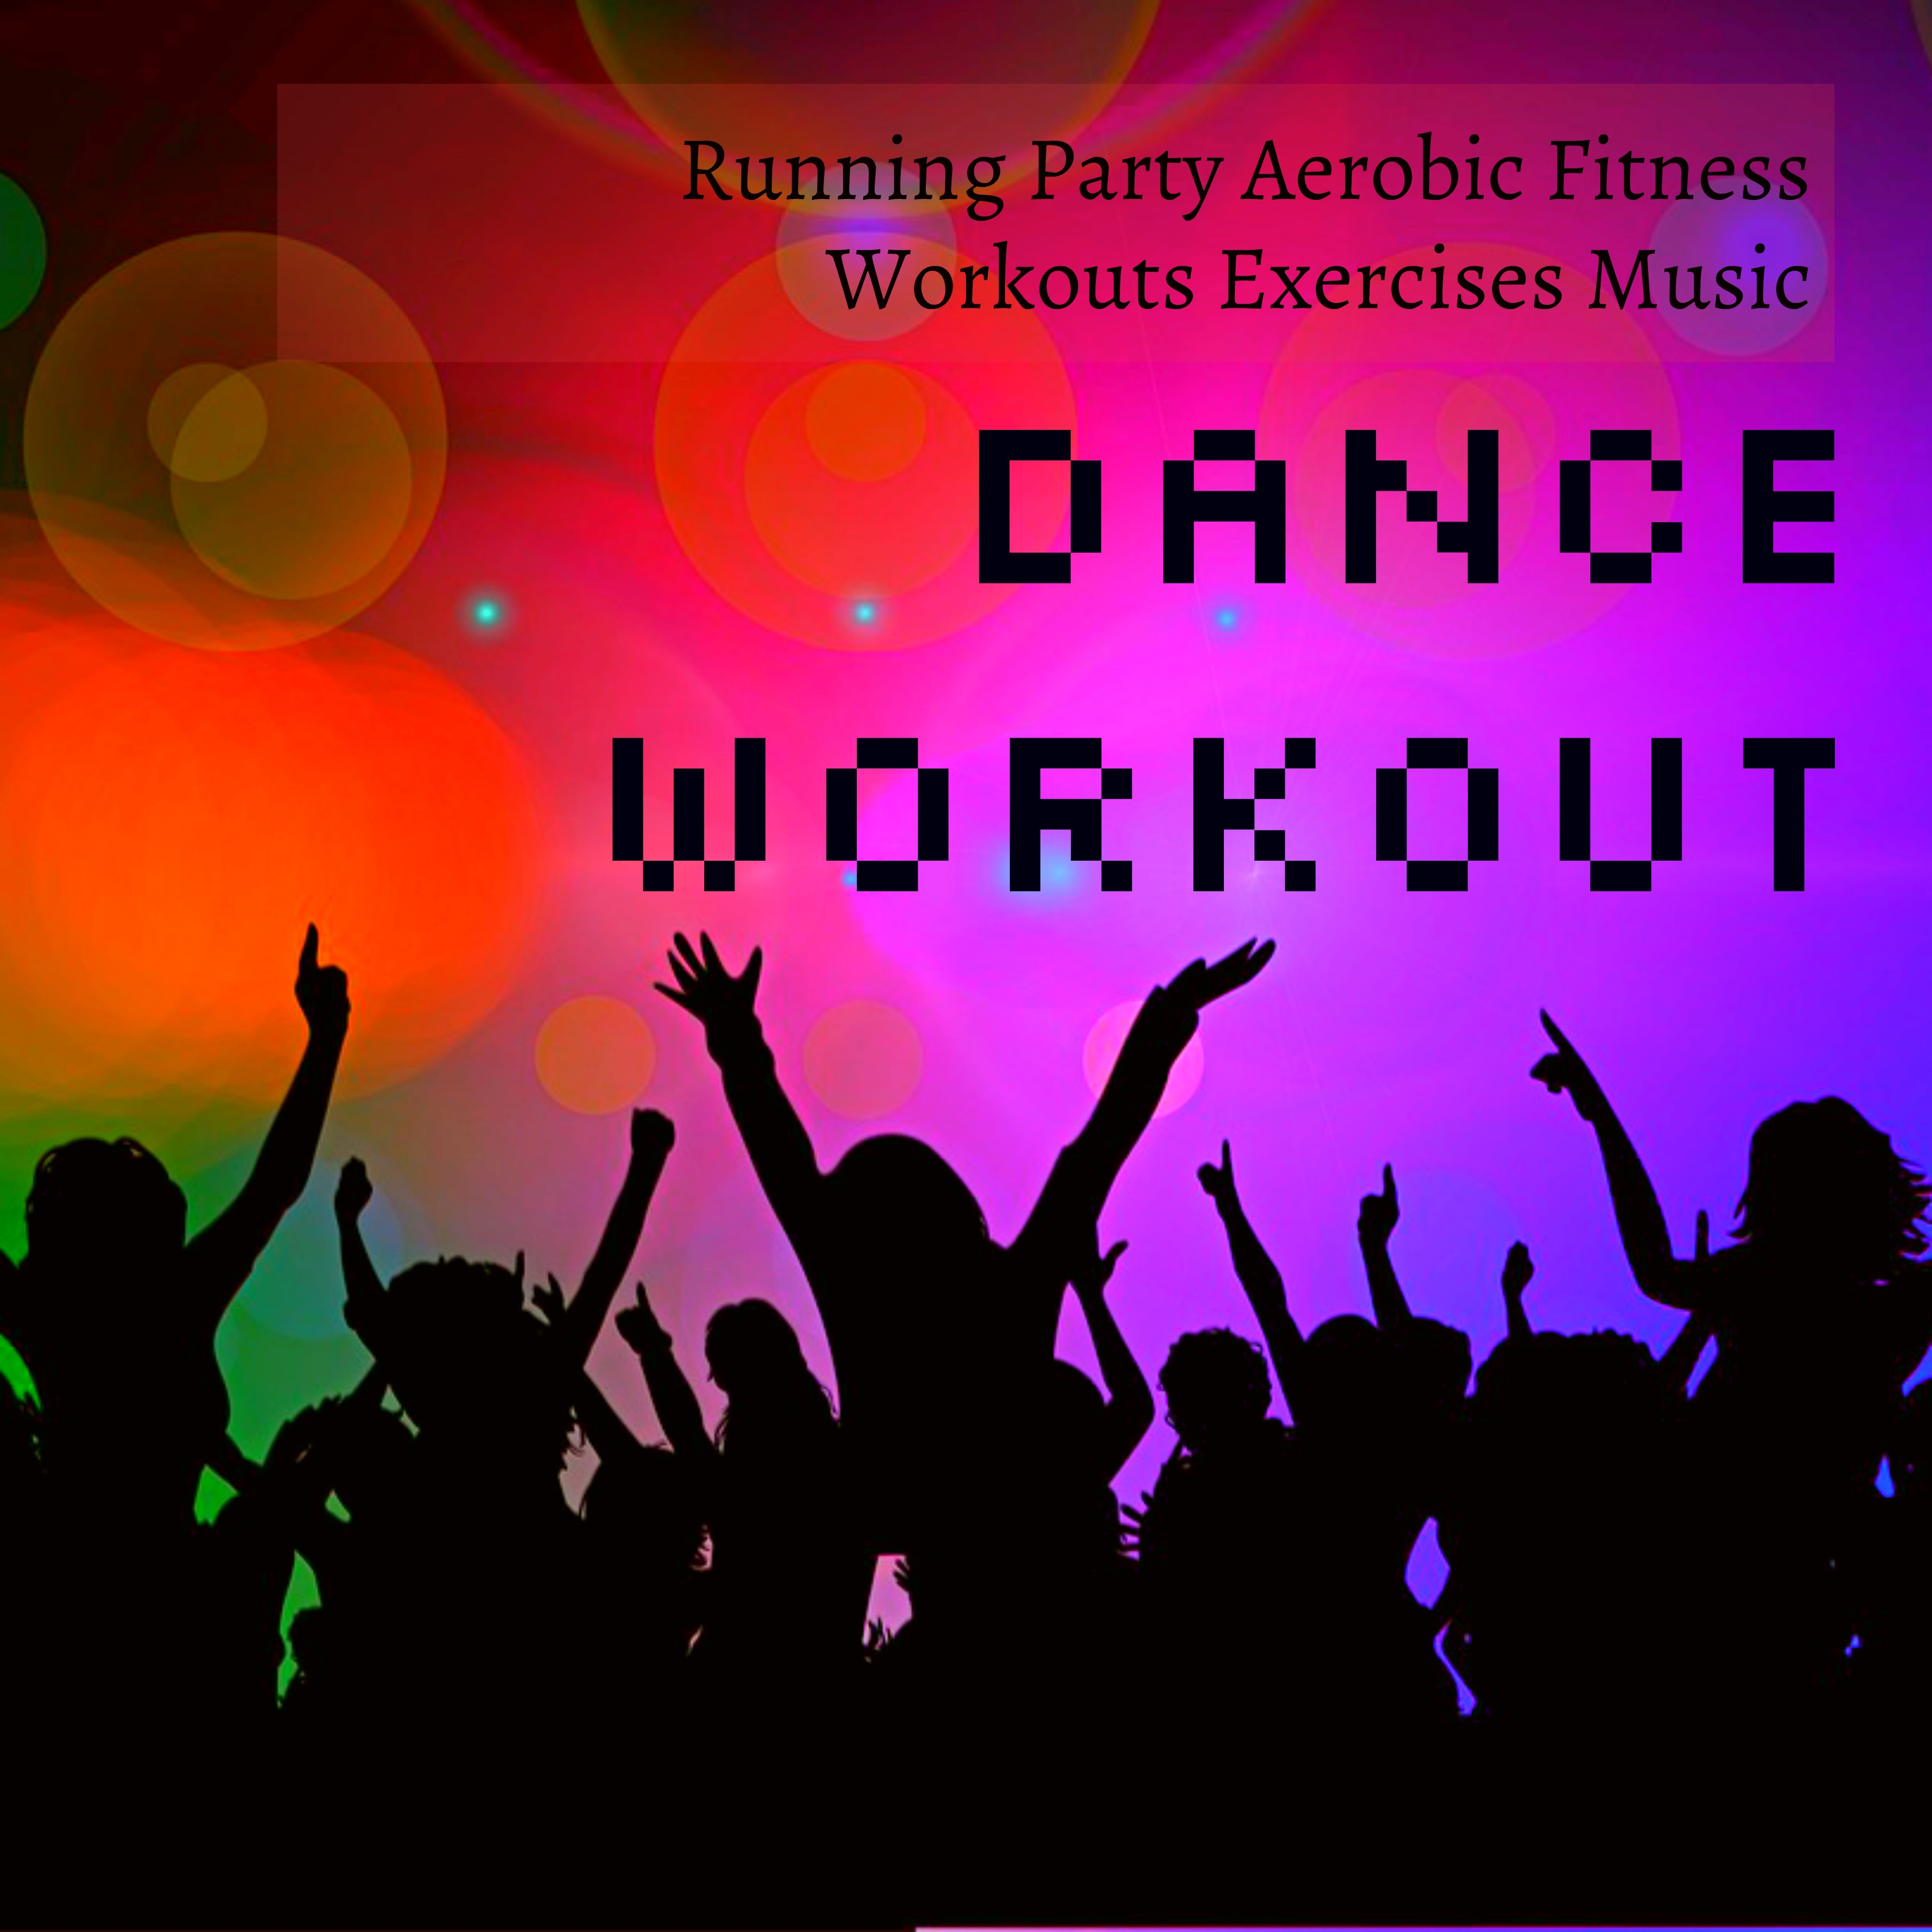 Dance Workout - Running Party Aerobic Fitness Workouts Exercises Music to Reduce Stress and Improve Body Power